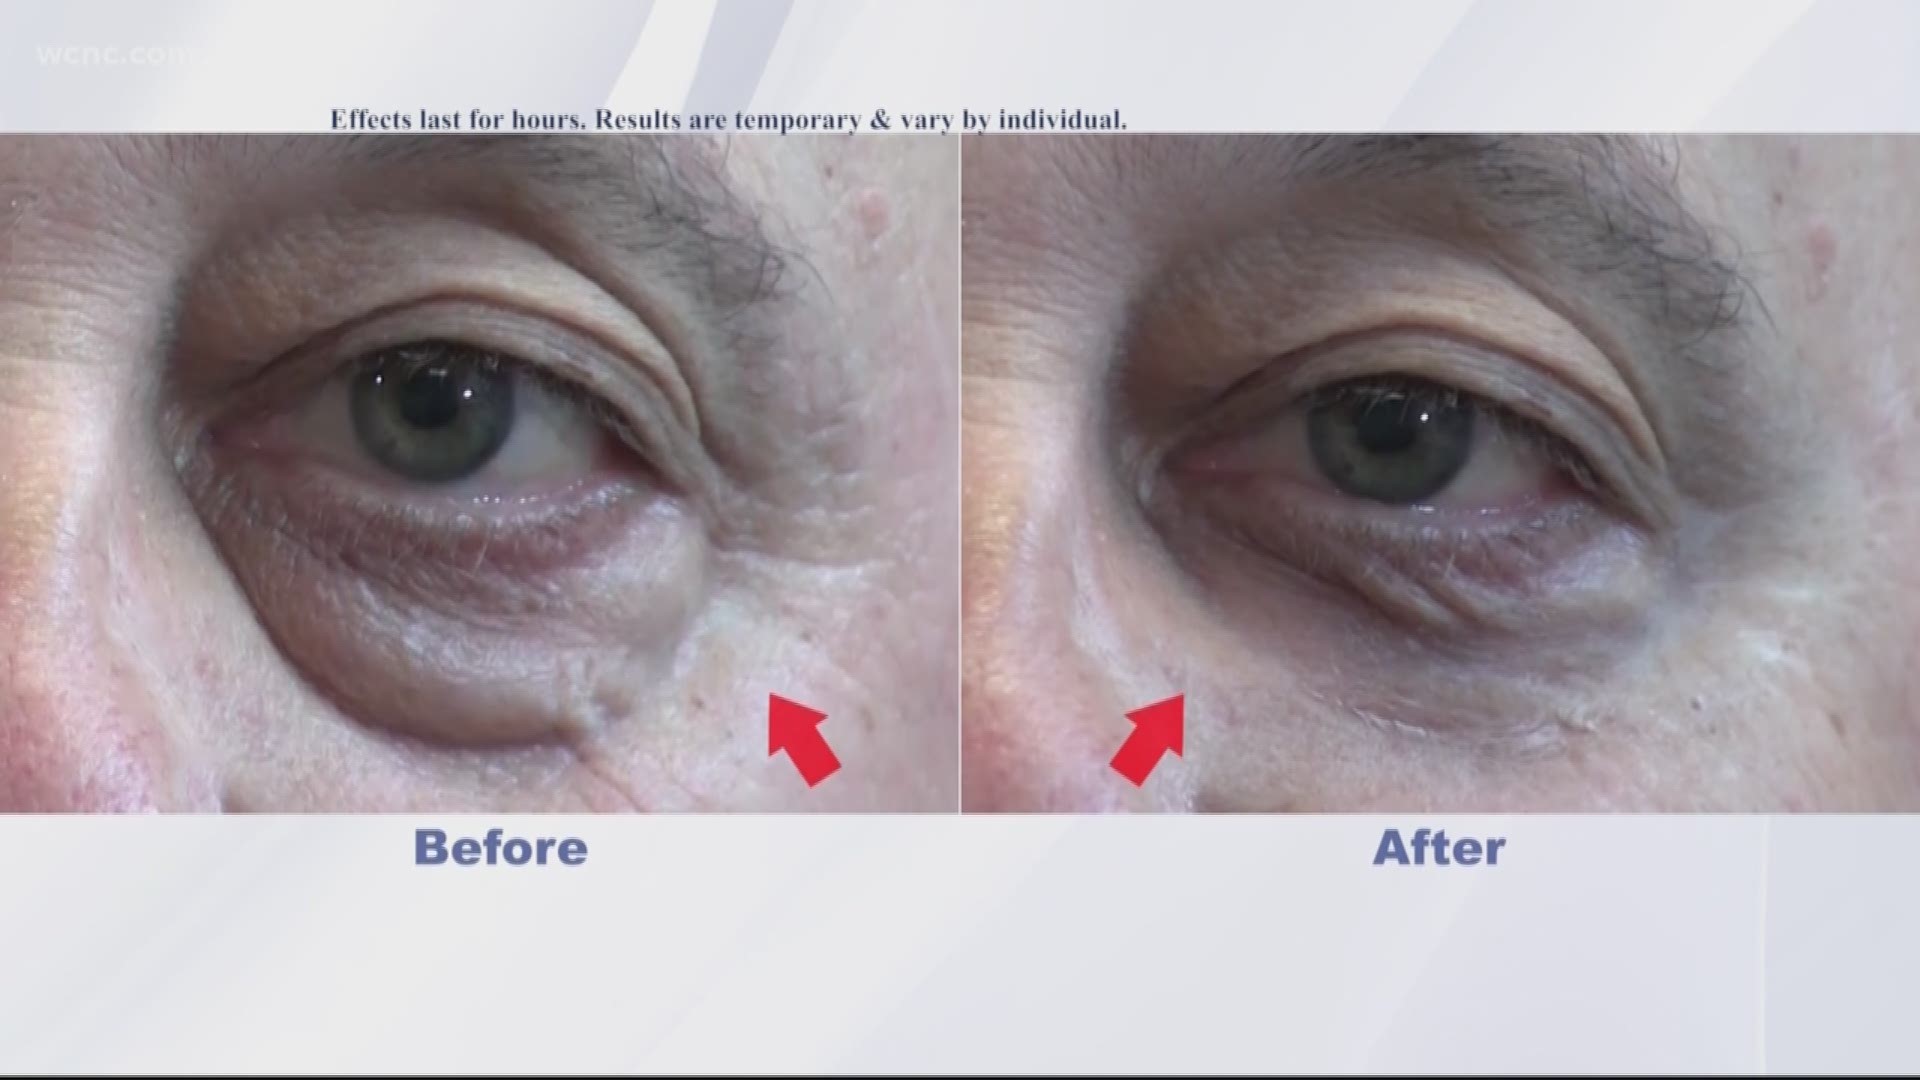 Plexaderm is a revolutionary product that decreases wrinkles and puffiness in minutes for a brighter, younger look.